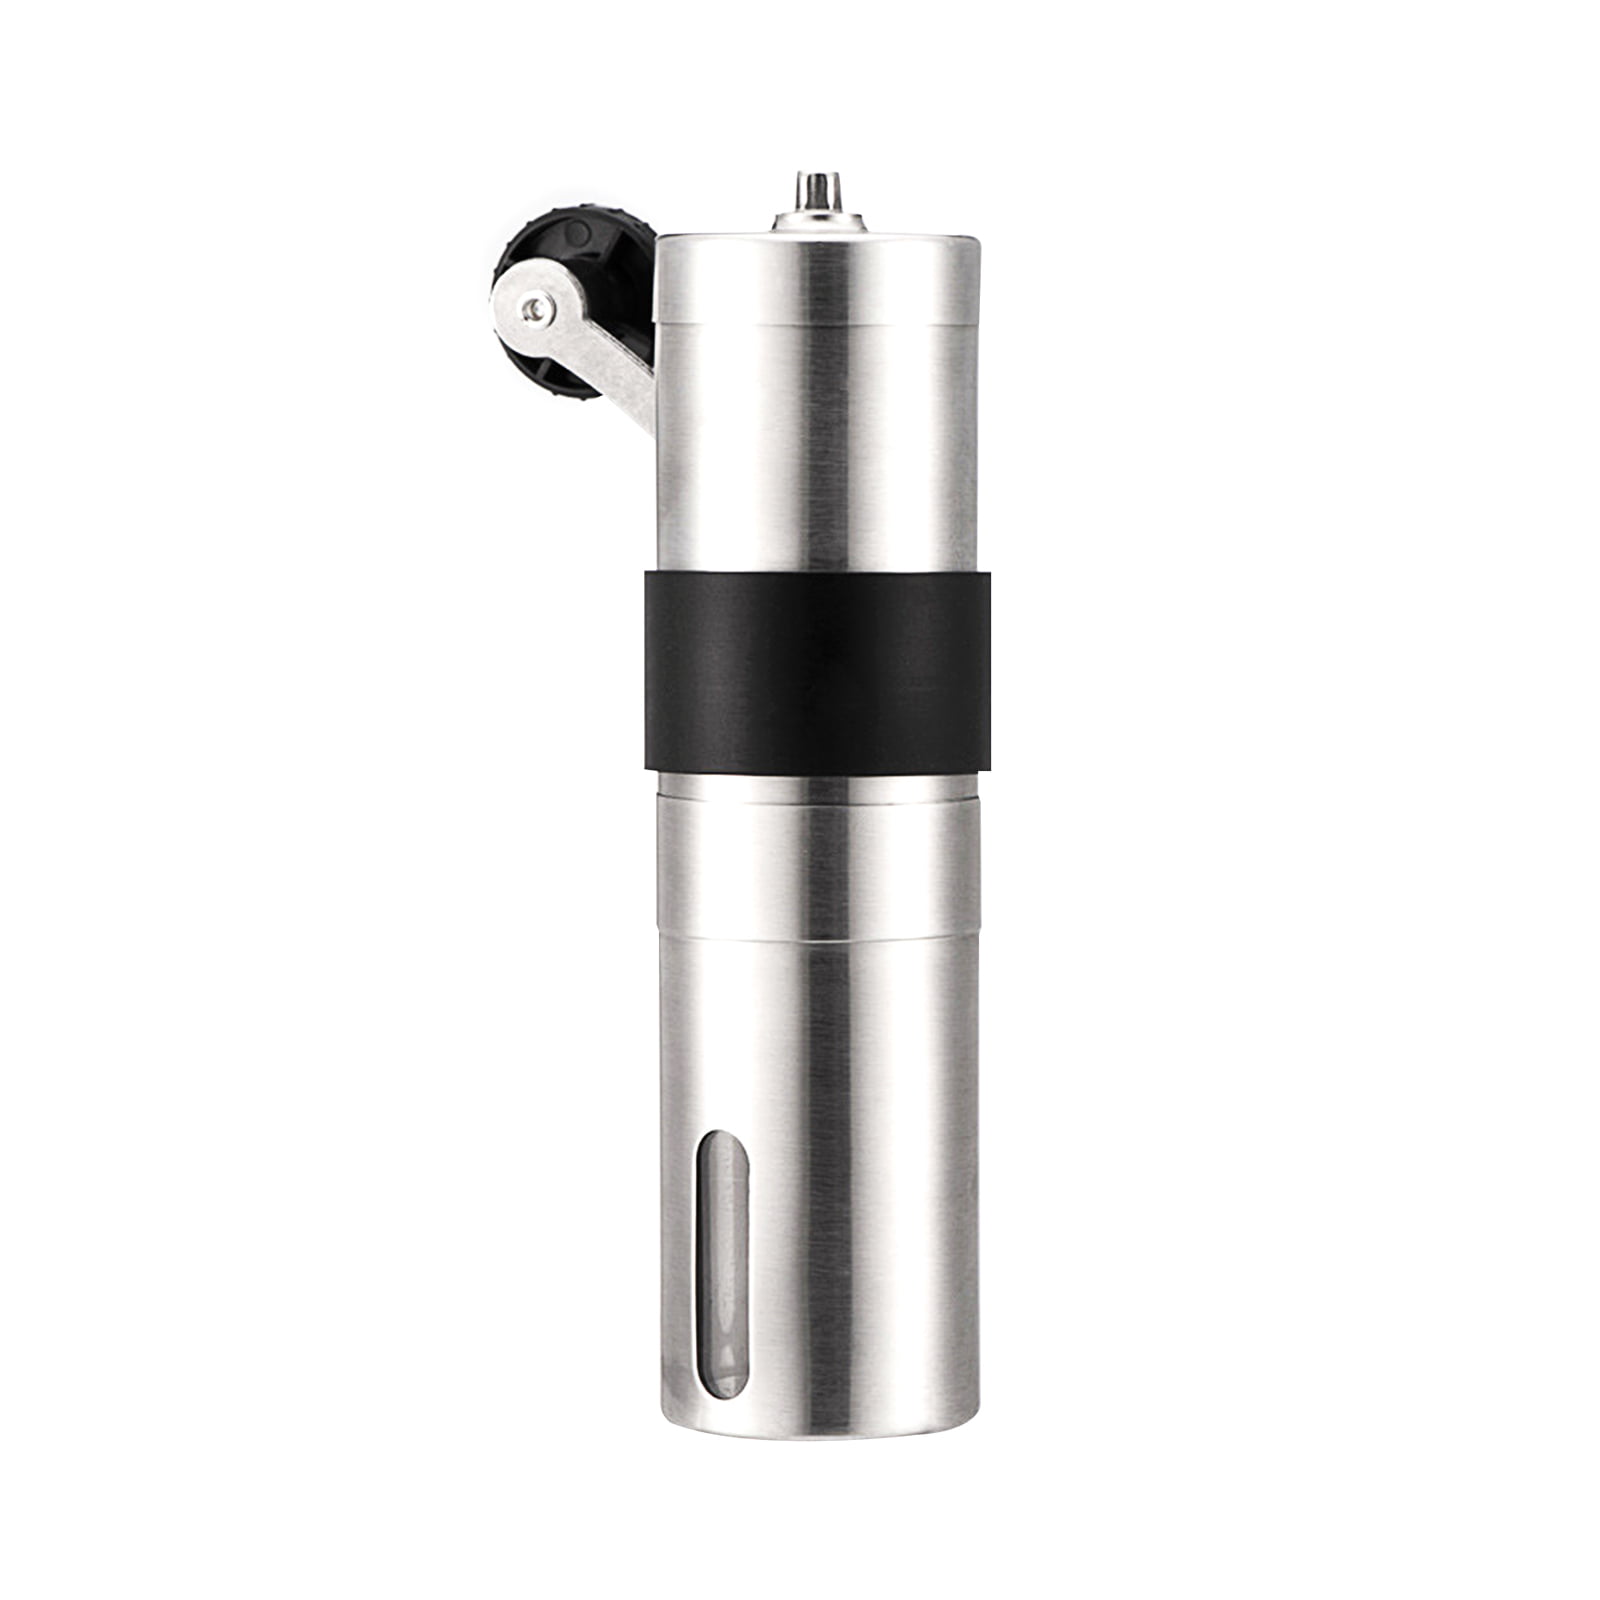 Kepfire Black Manual Coffee Grinder with Adjustable Ceramic Burr Pepper Grinder Brushed Stainless Steel Hand Bean Mill Portable for Home Barbecue Traveling